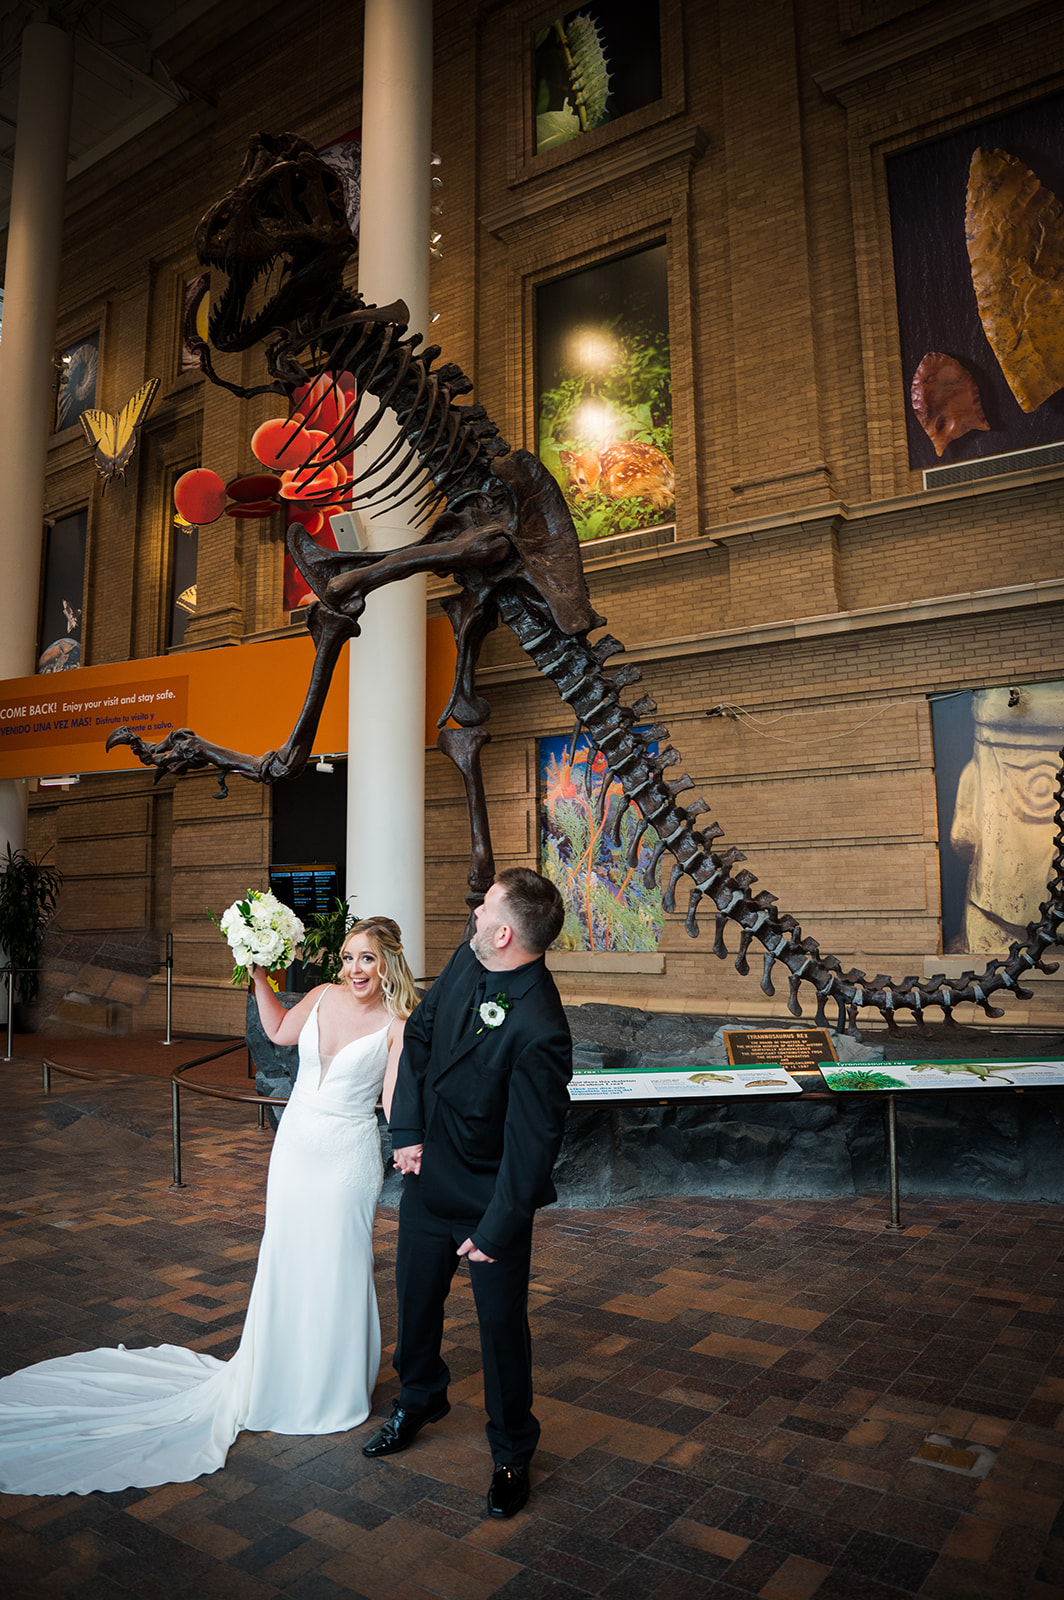 Bride and groom act silly in front of large dinosaur skeleton at the Denver Museum of Nature and Science.